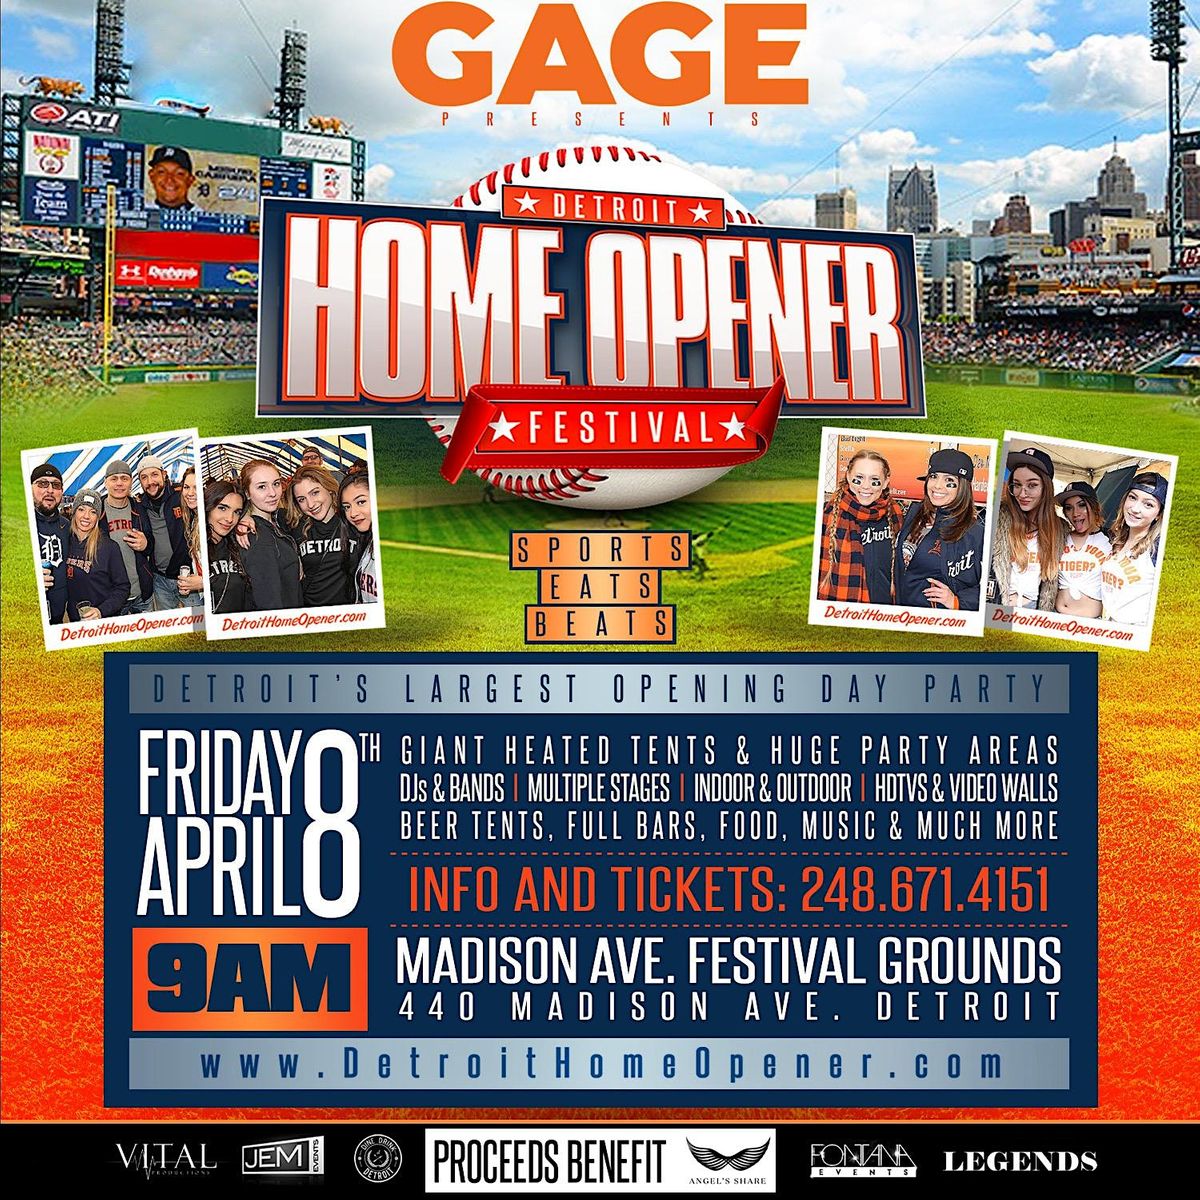 Detroit Home Opener Festival: The city's largest party!